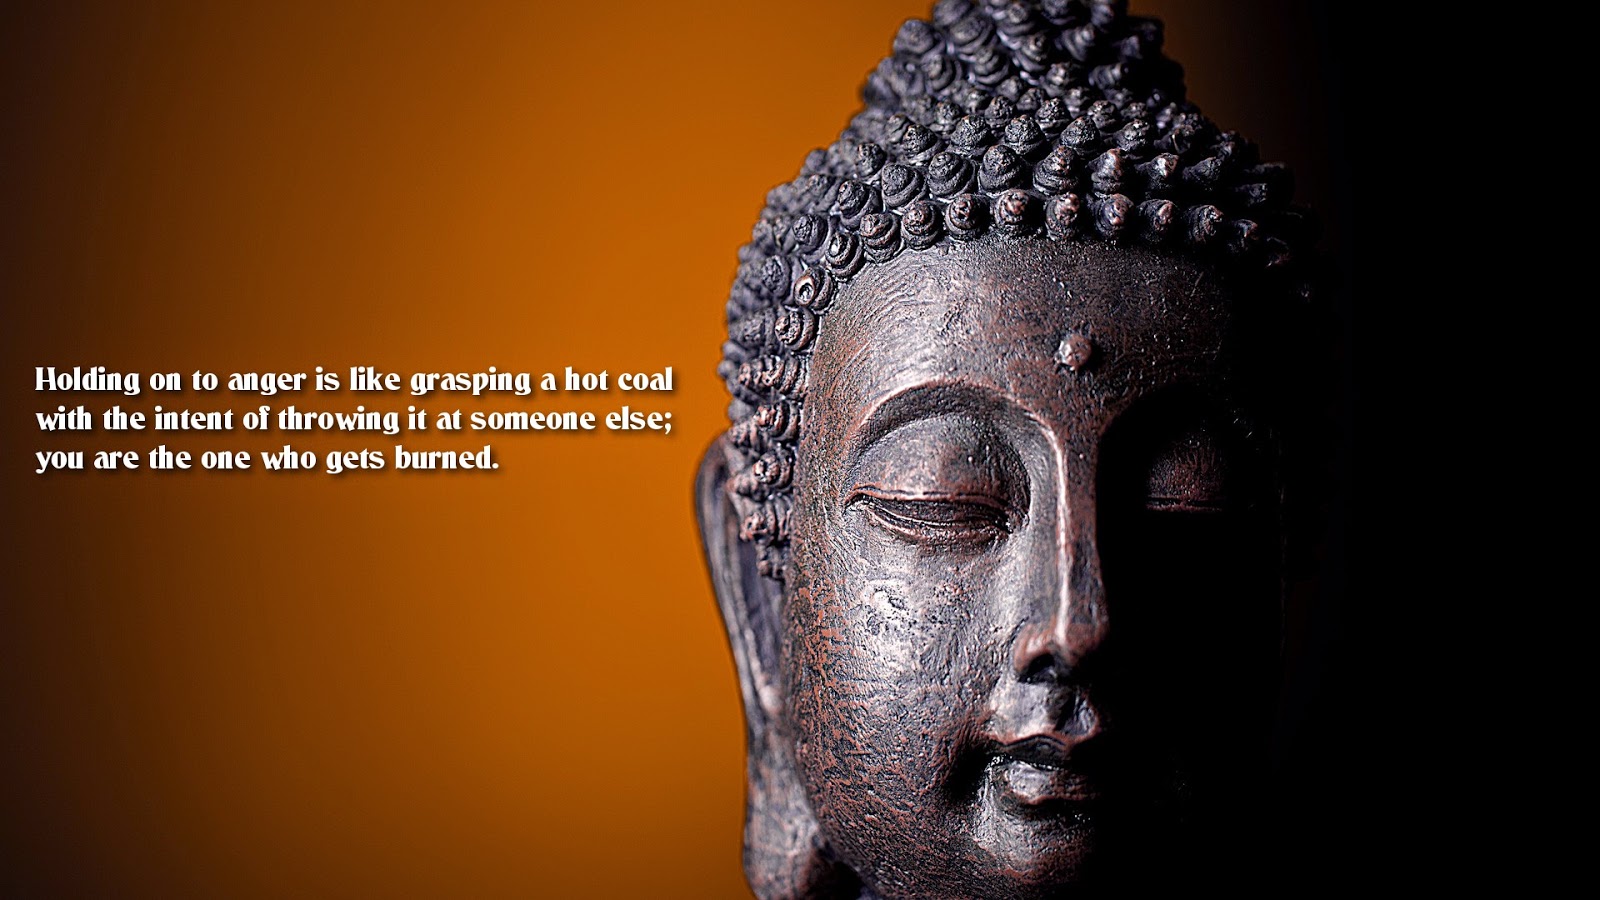 Buddha Wallpaper With Quotes On Life And Happiness HD